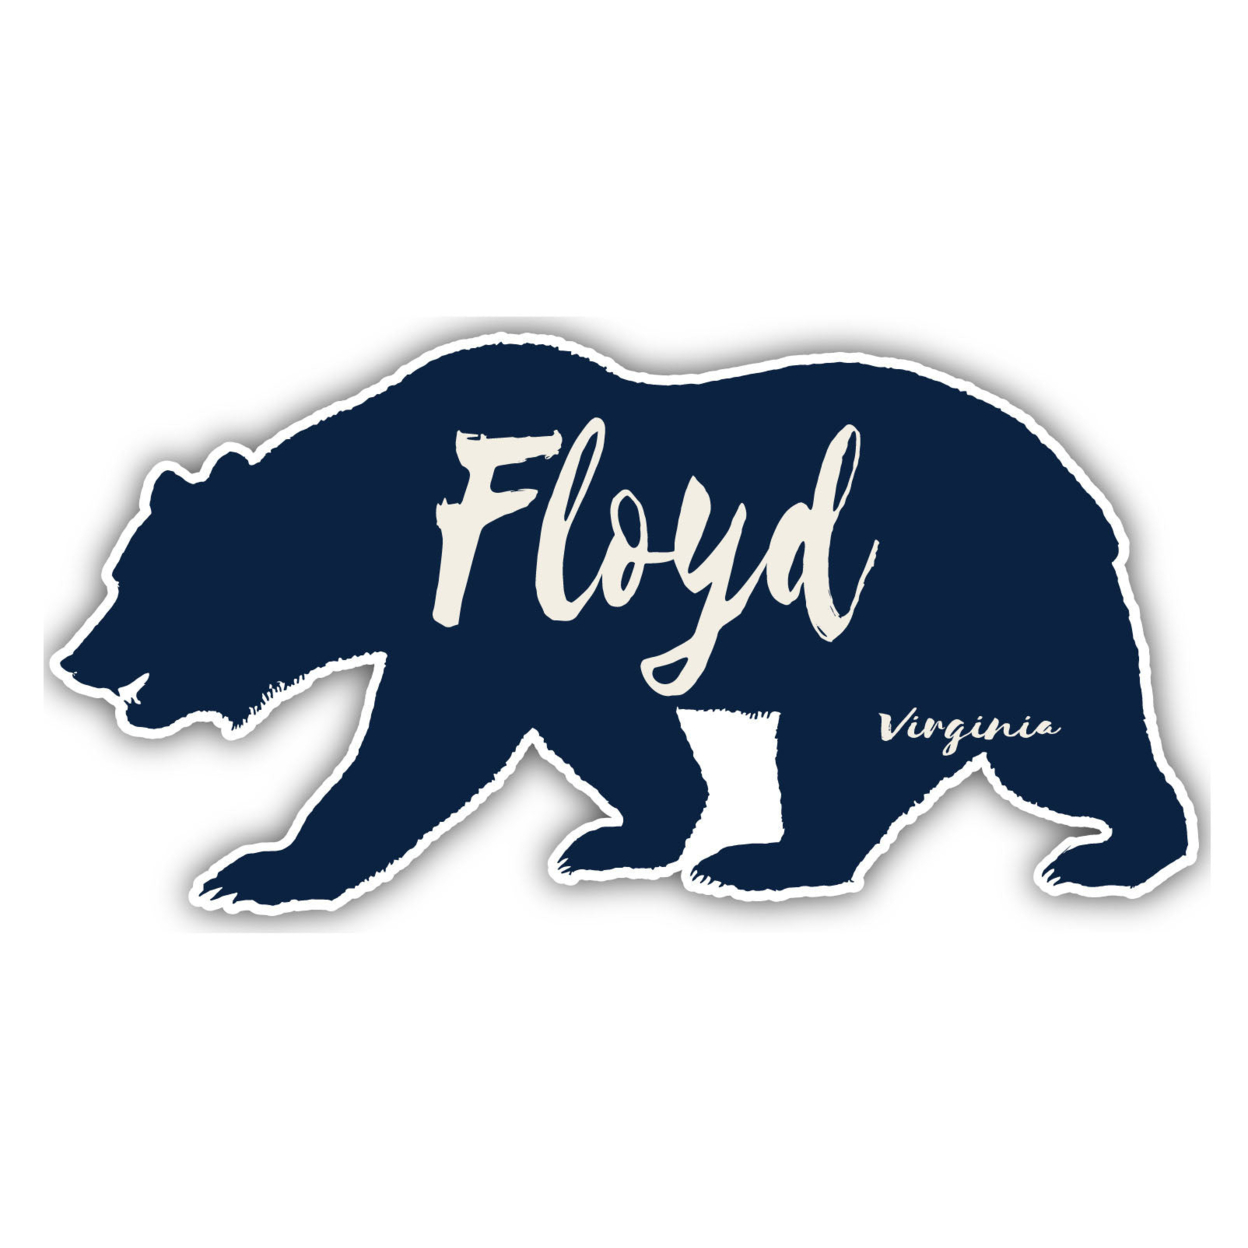 Floyd Virginia Souvenir Decorative Stickers (Choose Theme And Size) - Single Unit, 2-Inch, Great Outdoors